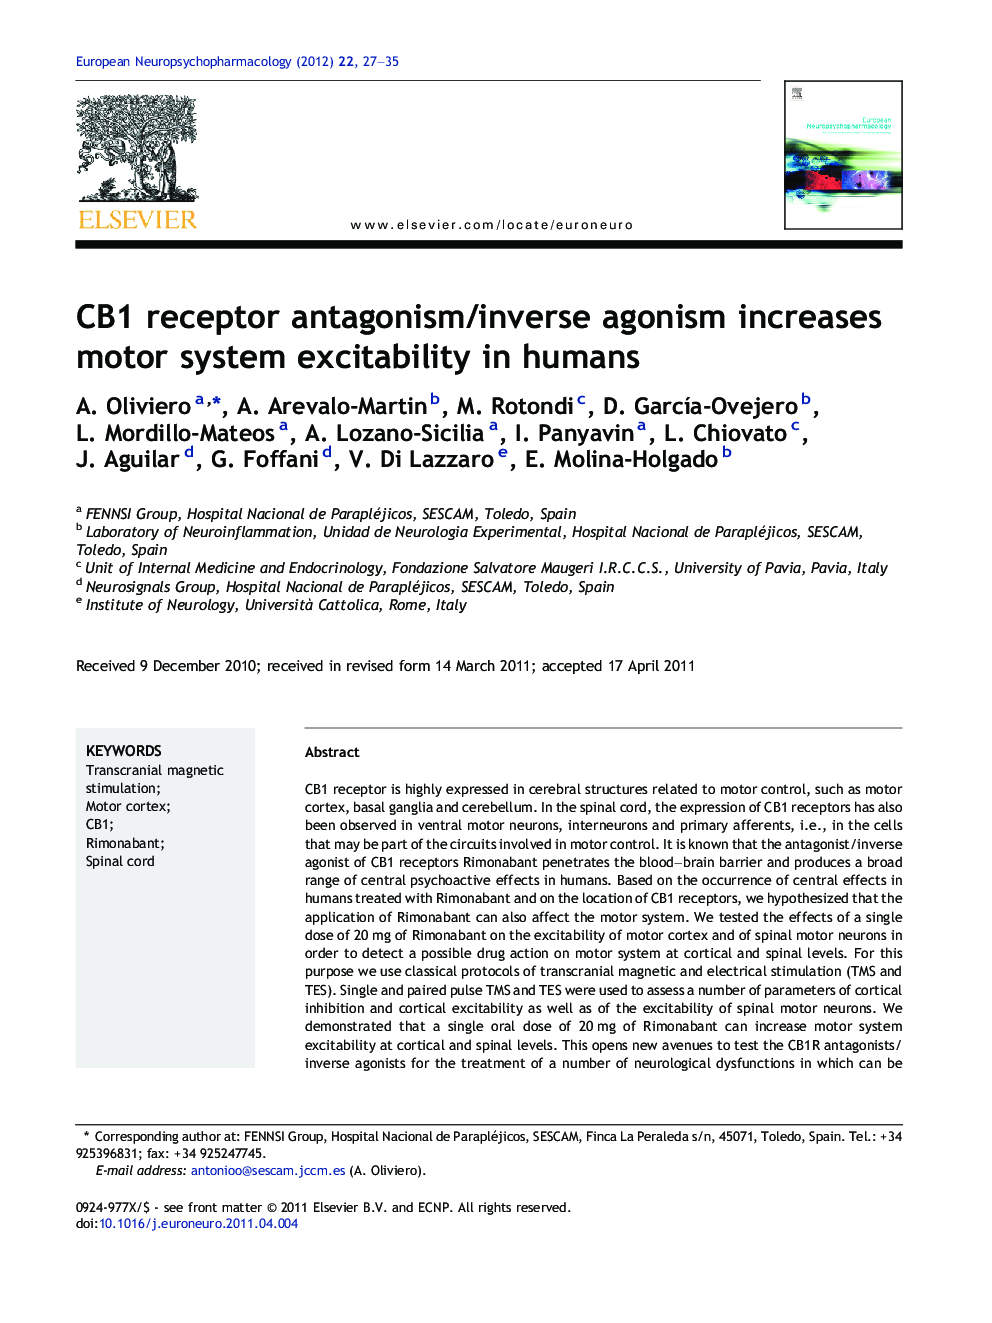 CB1 receptor antagonism/inverse agonism increases motor system excitability in humans